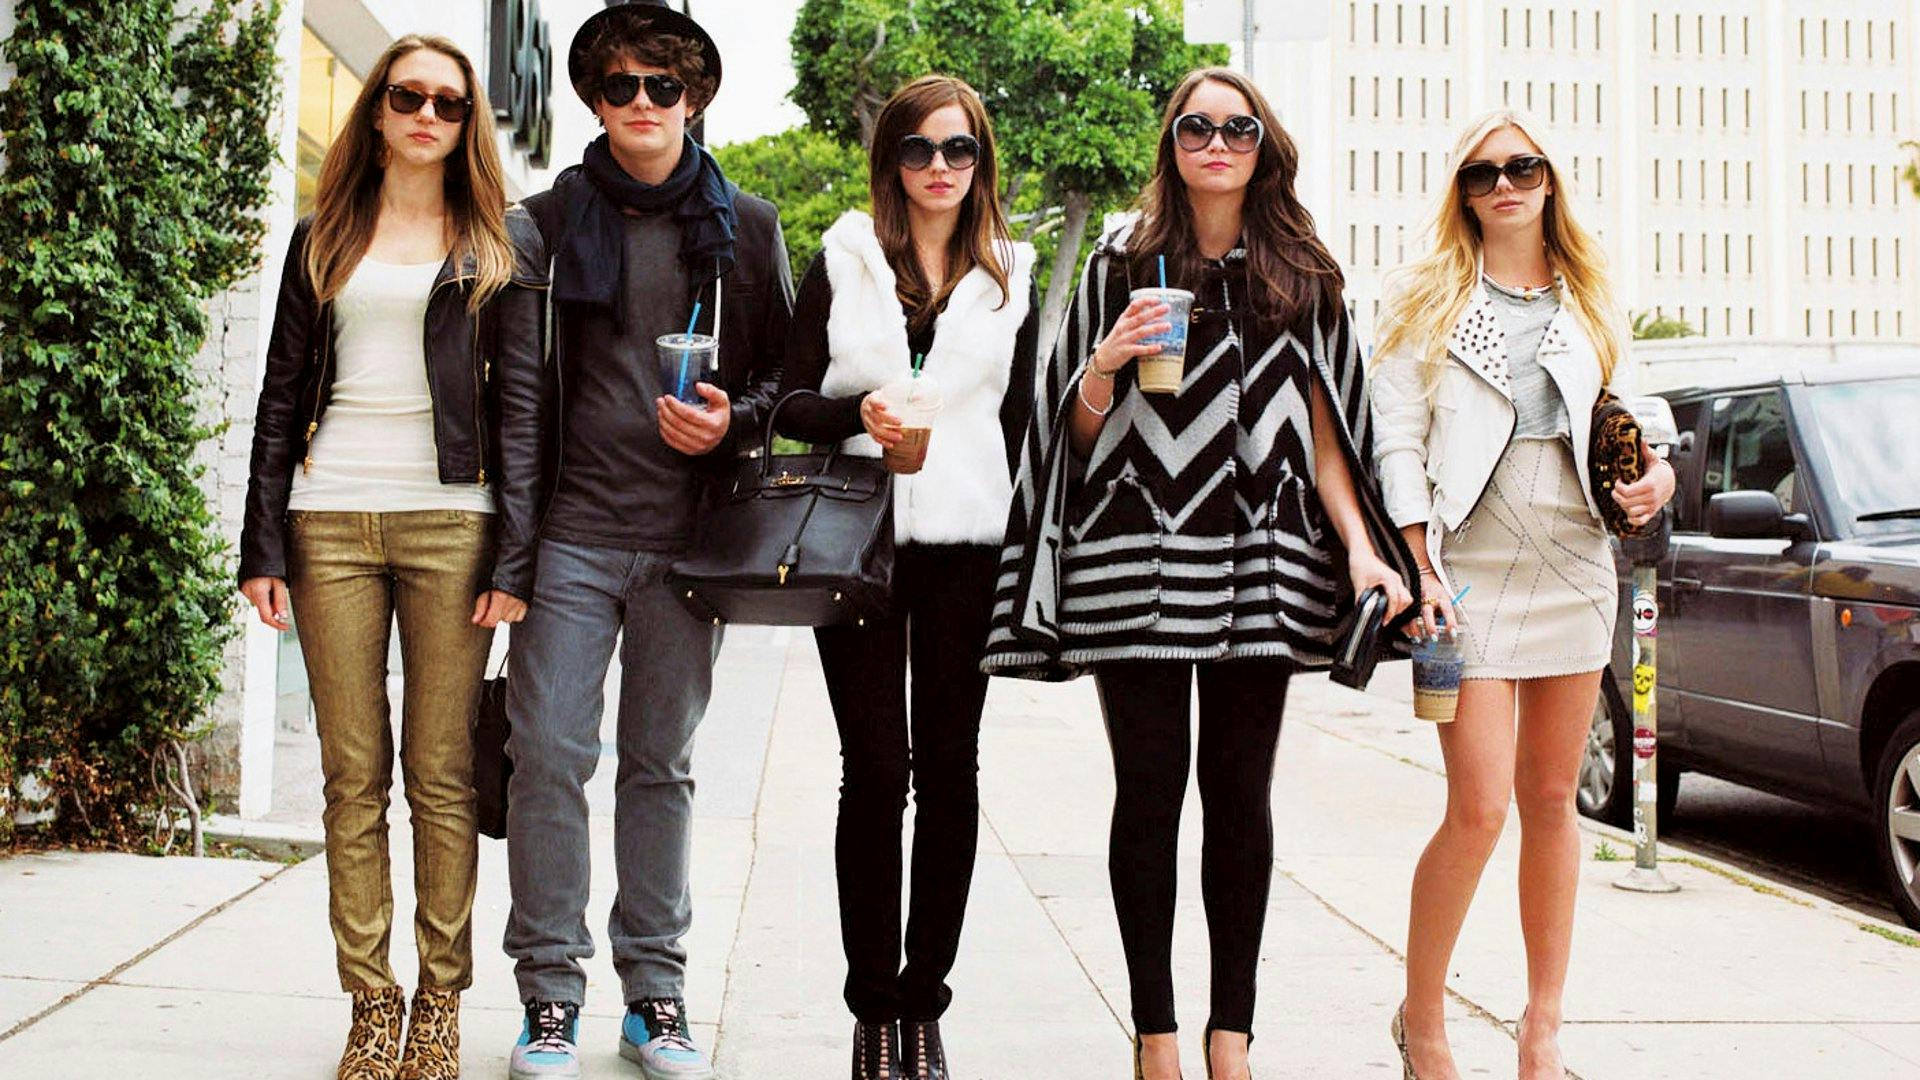 Review: 'The Bling Ring' Offers a Fishbowl View of Celebrity, But Flails  Without Proper Focus (2013/06/14)- Tickets to Movies in Theaters, Broadway  Shows, London Theatre & More | Hollywood.com